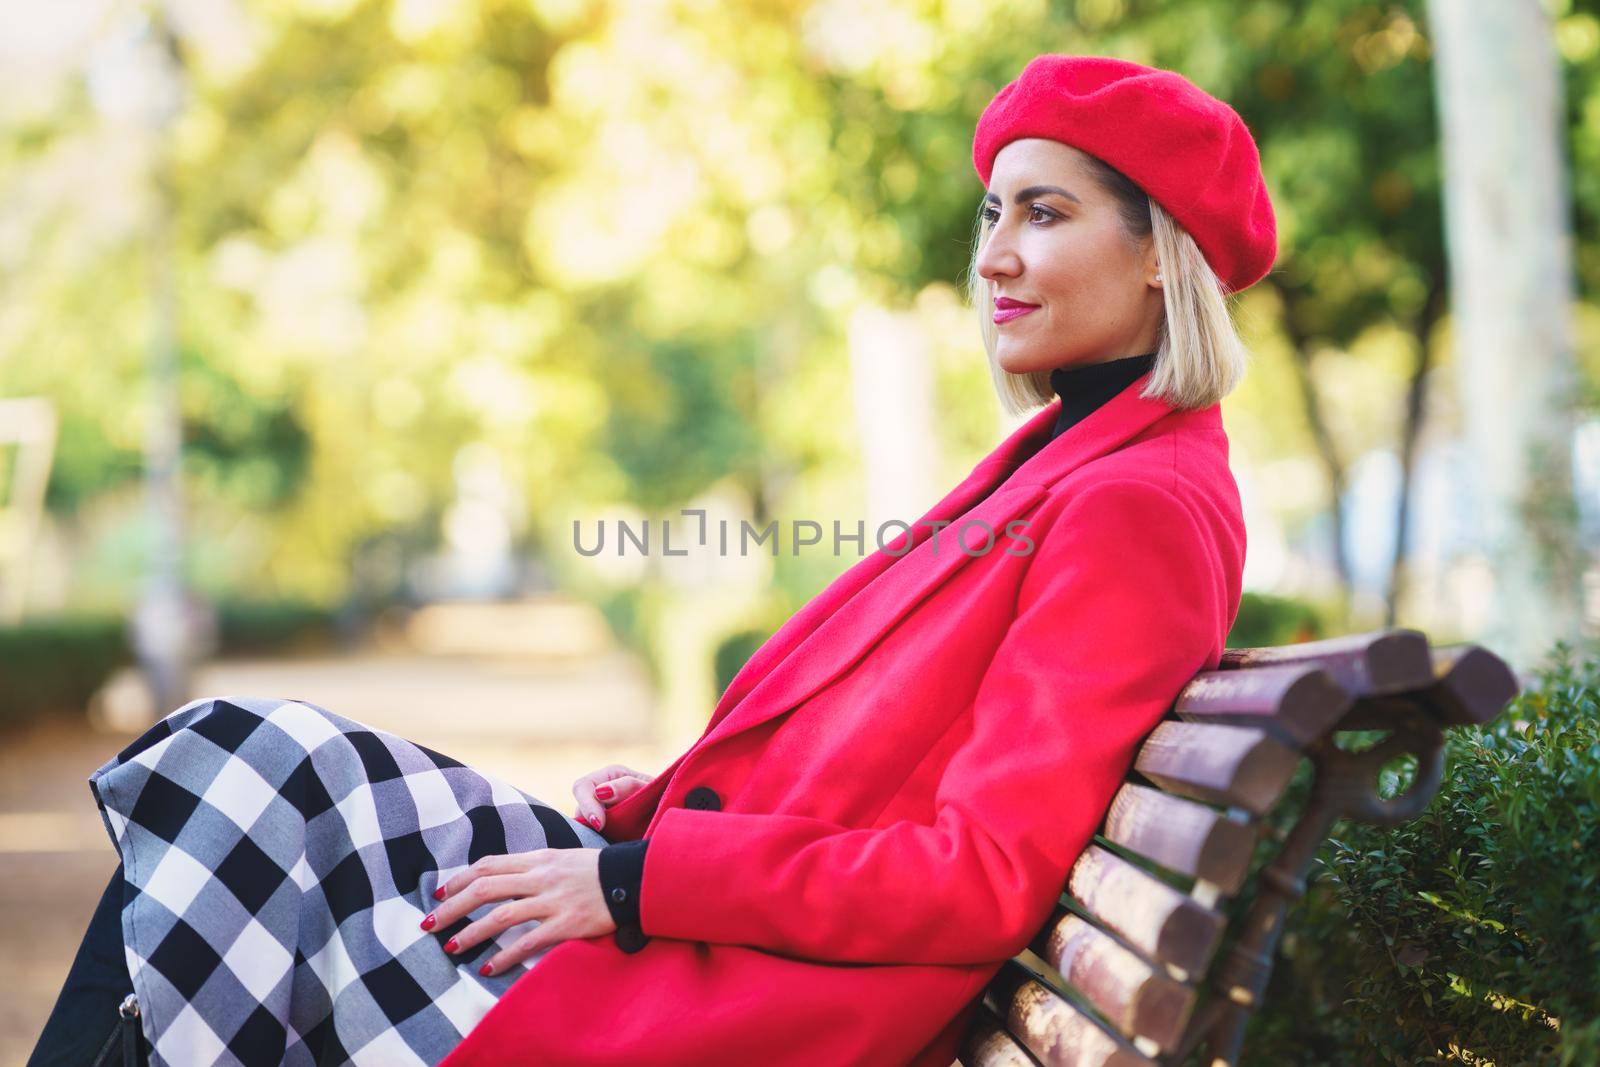 Middle-aged woman sitting on a bench in an urban park wearing red winter clothing. Female wearing coat, skirt and beret outdoors.